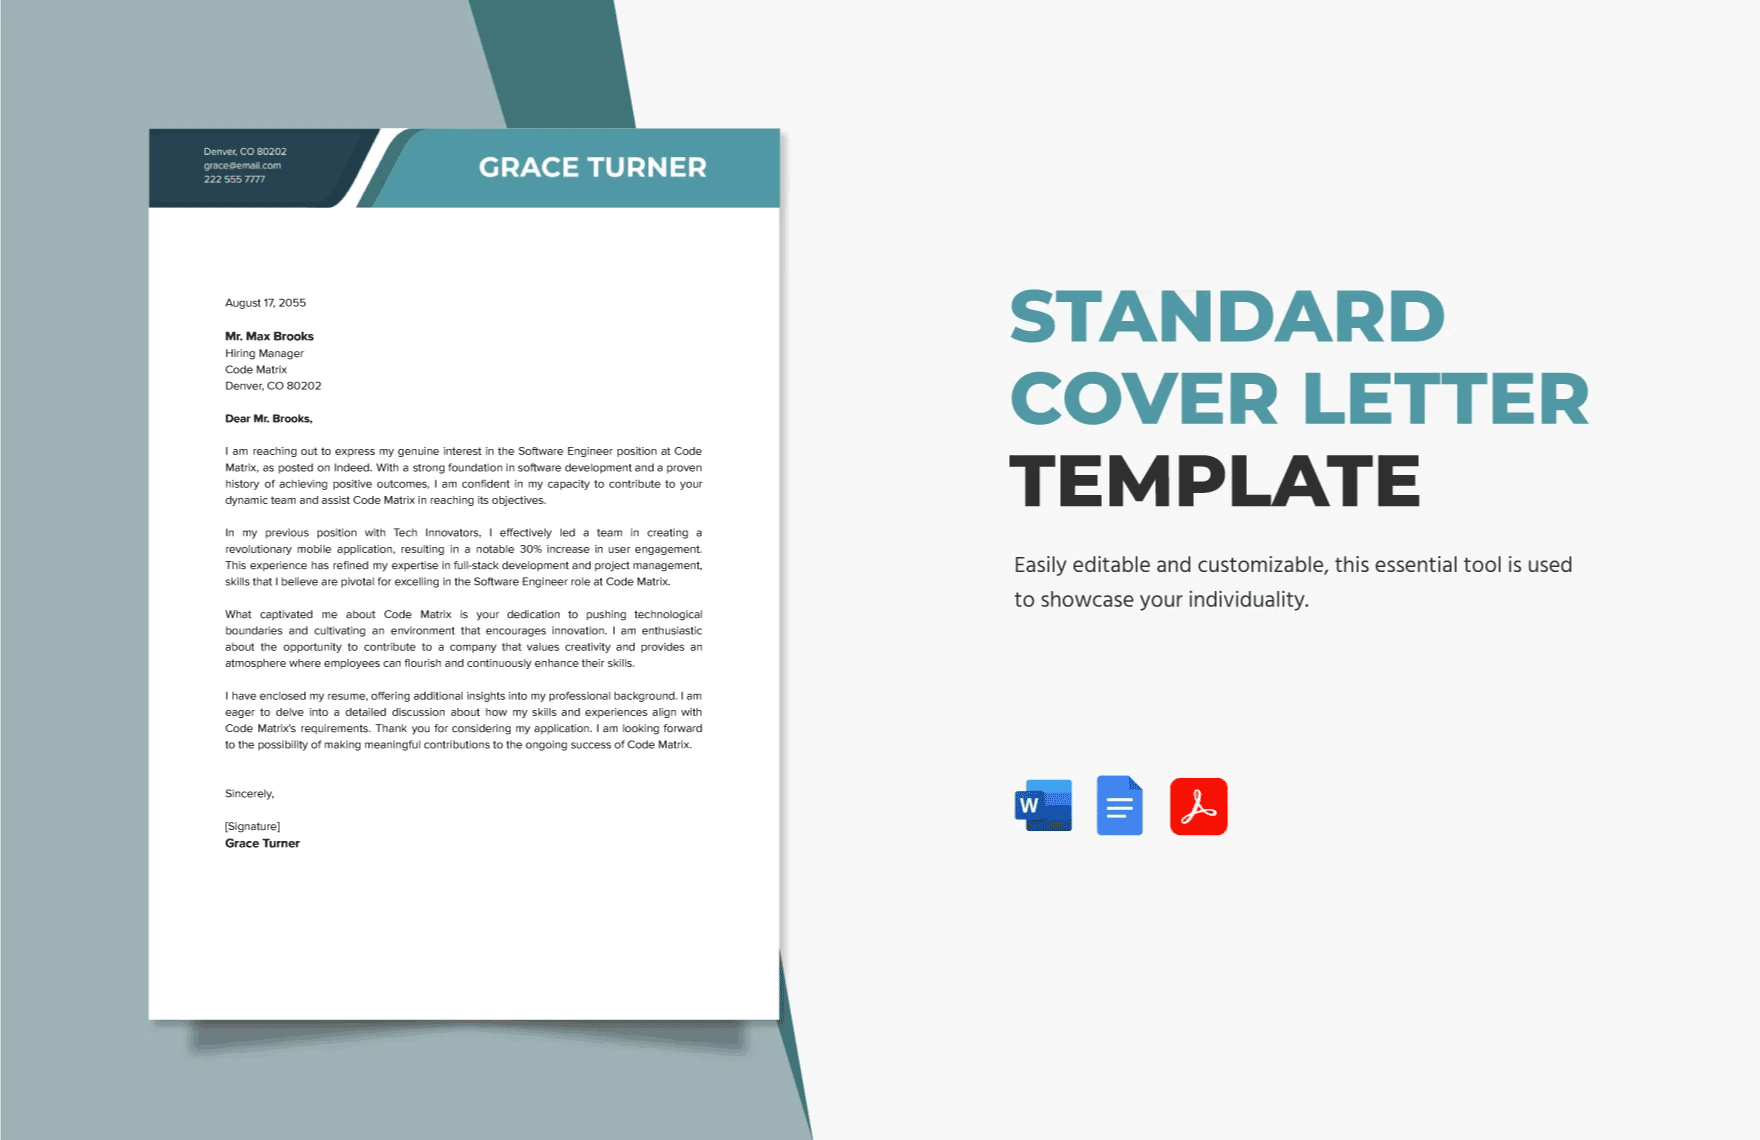 Standard Cover Letter Template